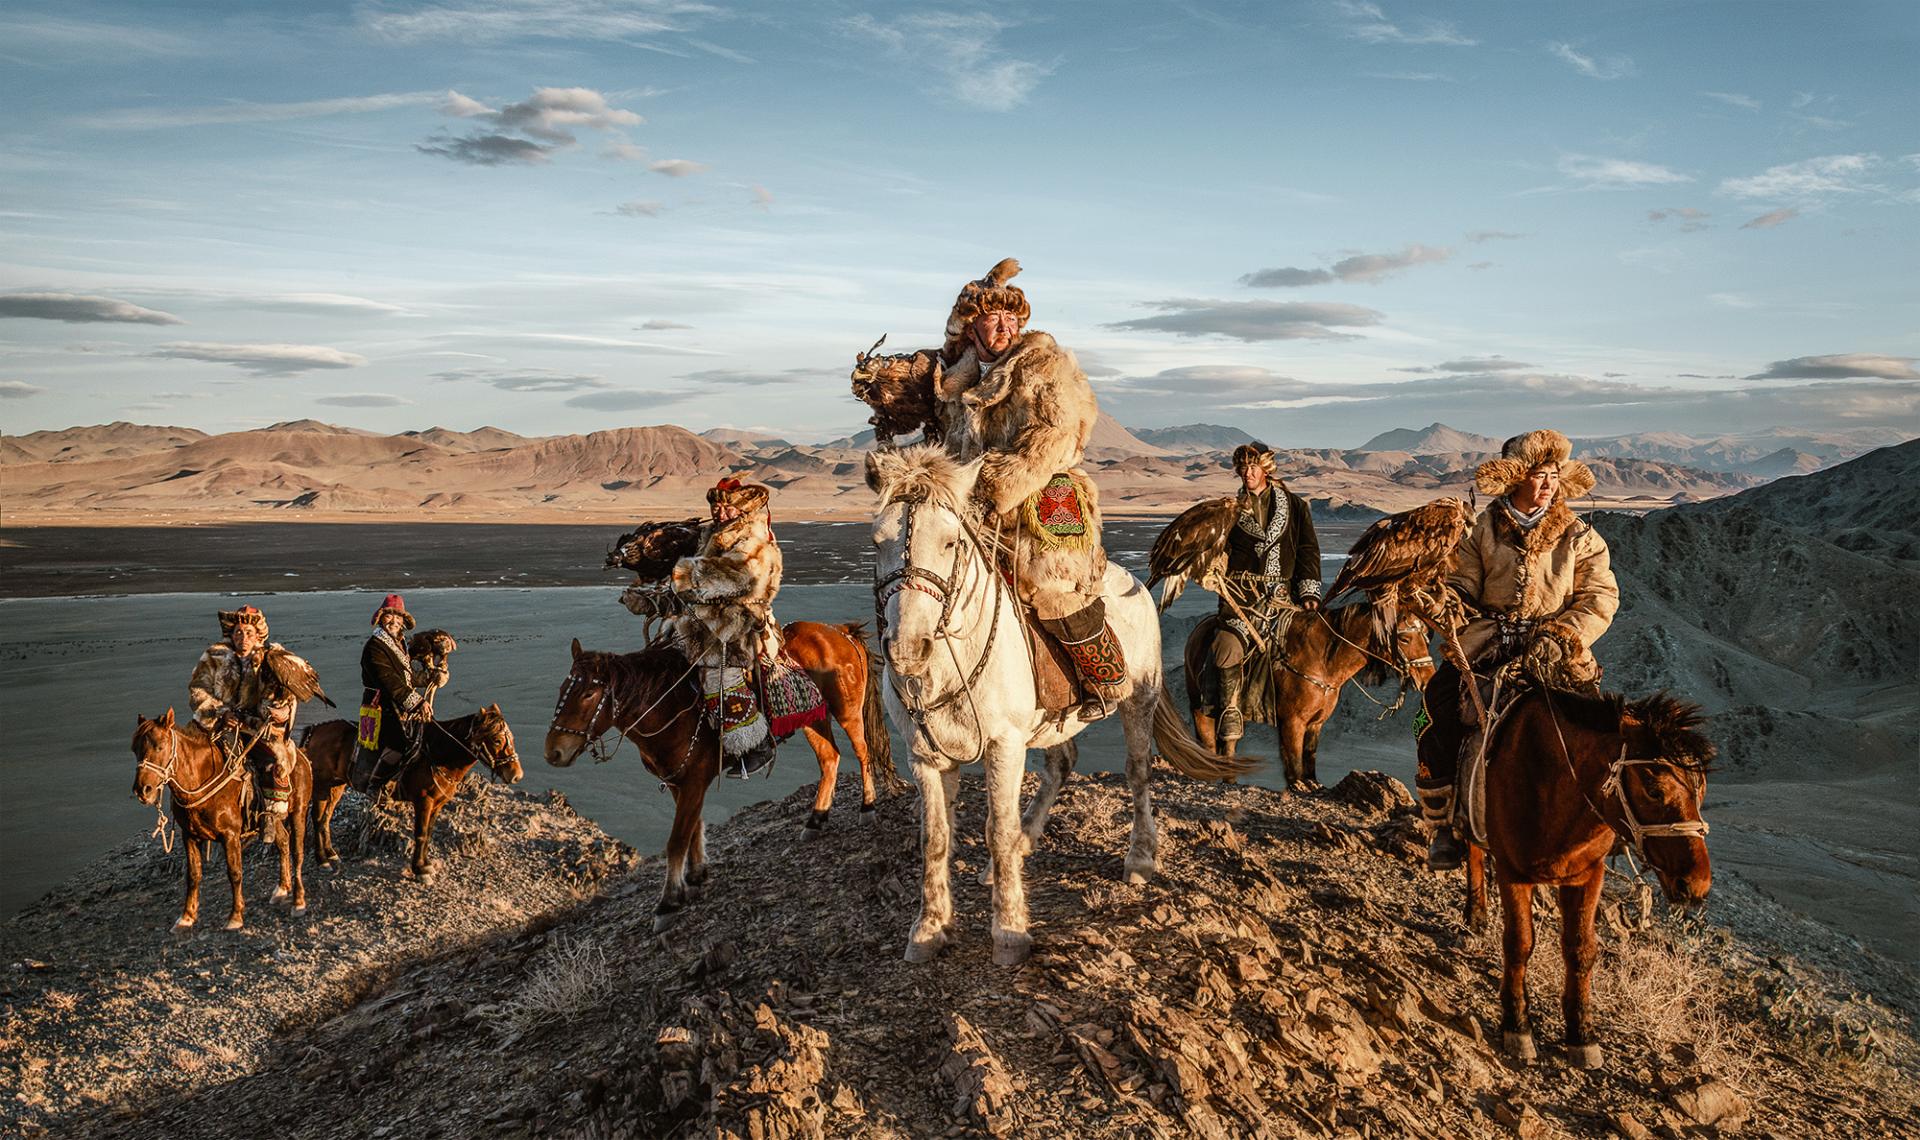 New York Photography Awards Winner - Reign of the Eagle Hunters